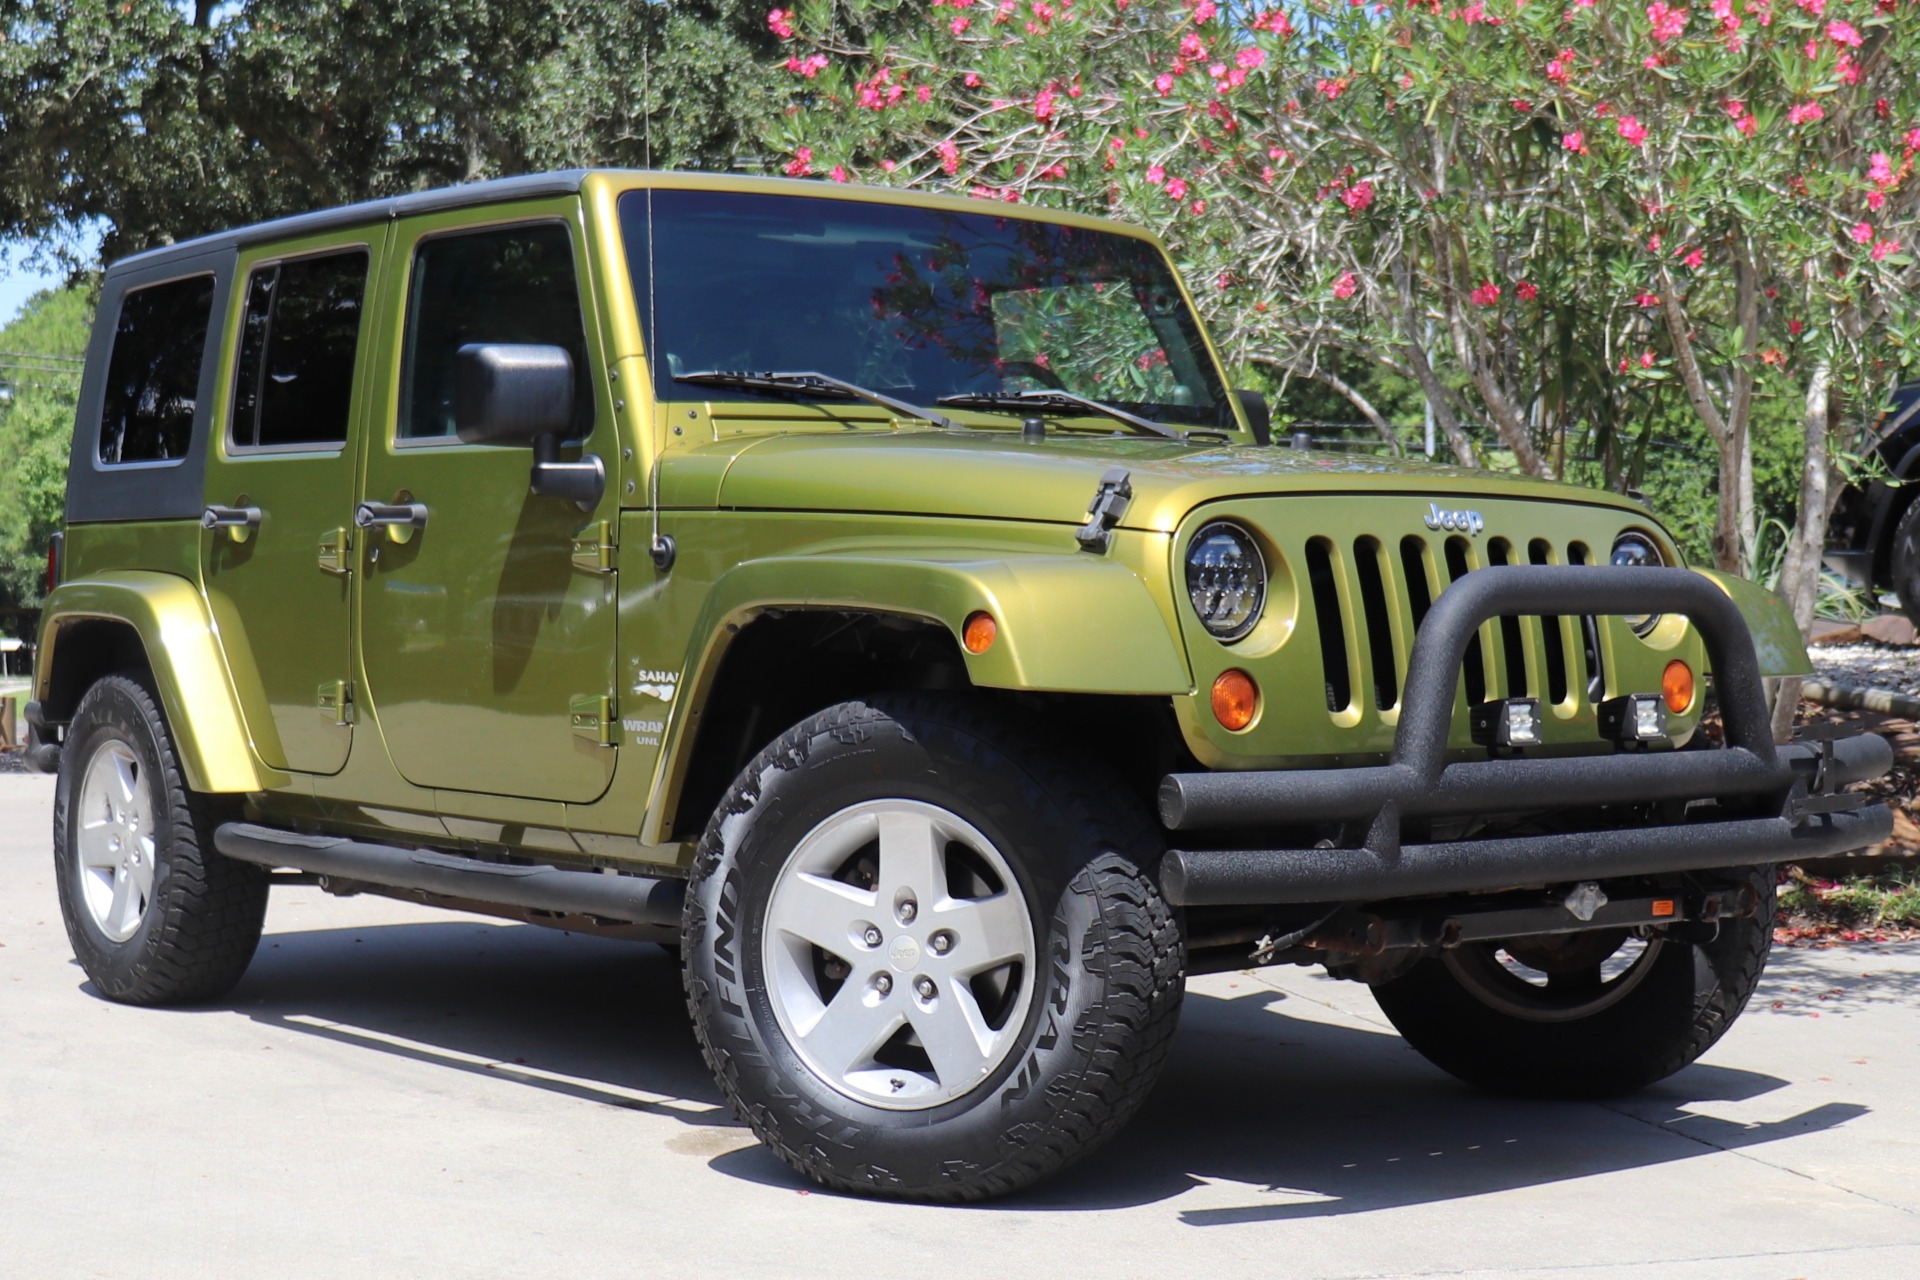 Used 2007 Jeep Wrangler Unlimited Sahara For Sale ($18,995) | Select Jeeps  Inc. Stock #217197